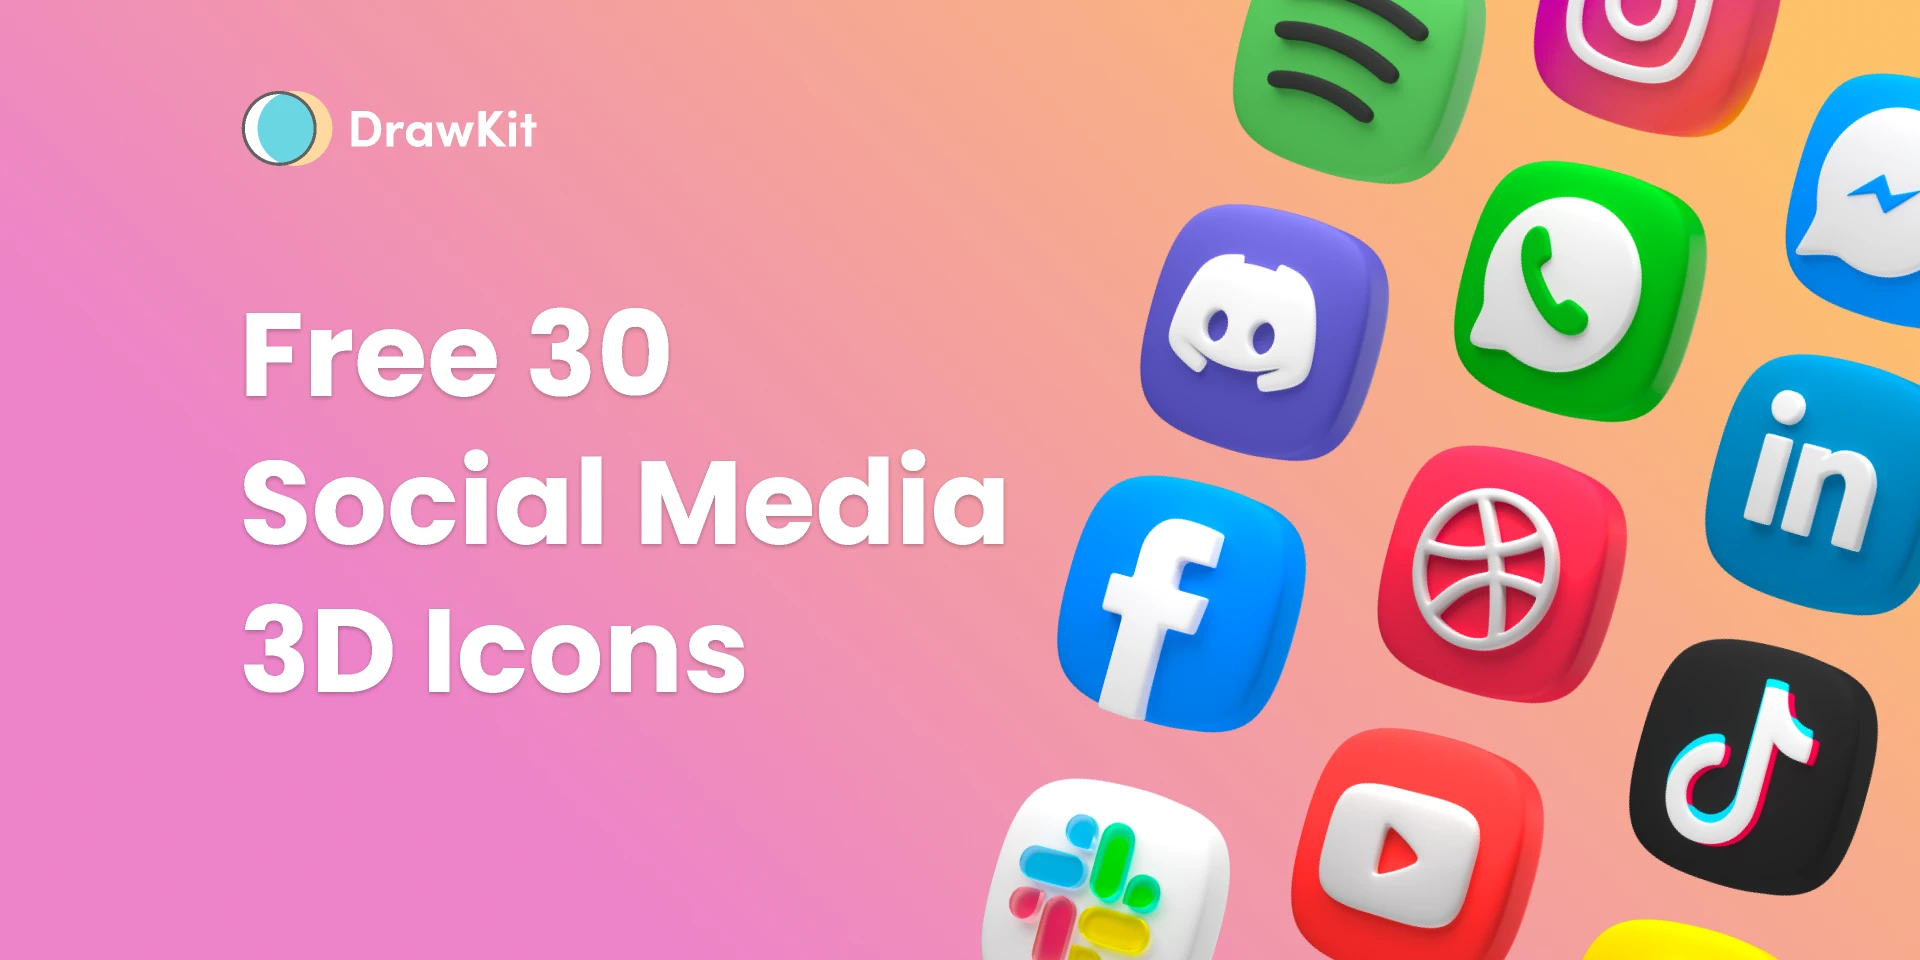 Free Social Media 3D Icons - DrawKit for Figma and Adobe XD